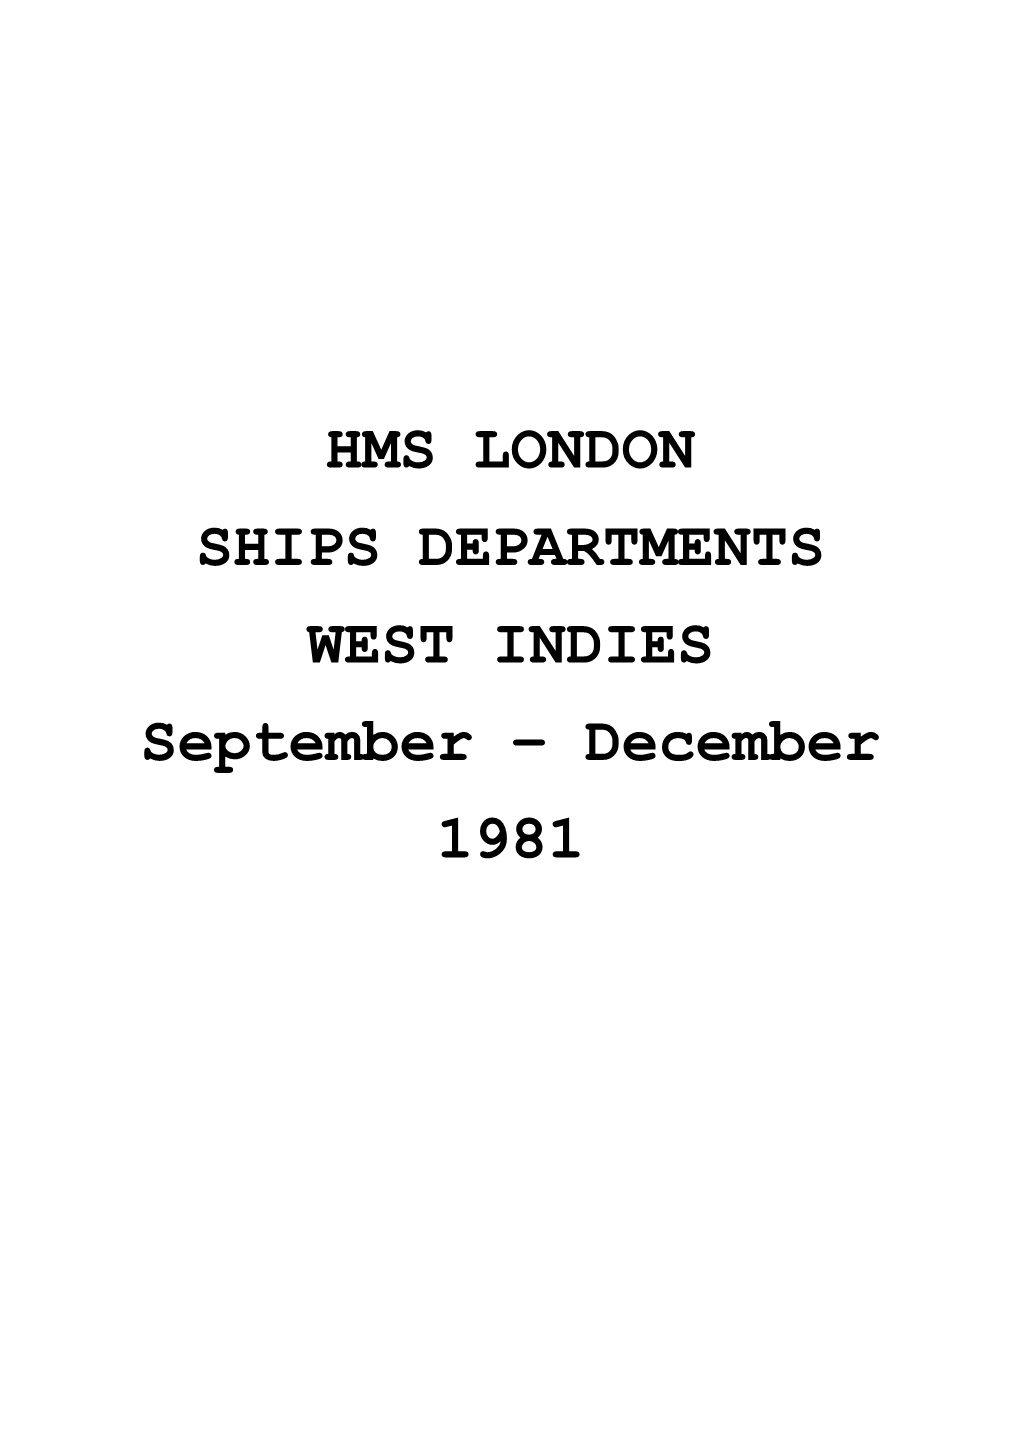 HMS LONDON SHIPS DEPARTMENTS WEST INDIES September – December 1981 the WEST INDIES DEPLOYMENT the REASON WHY